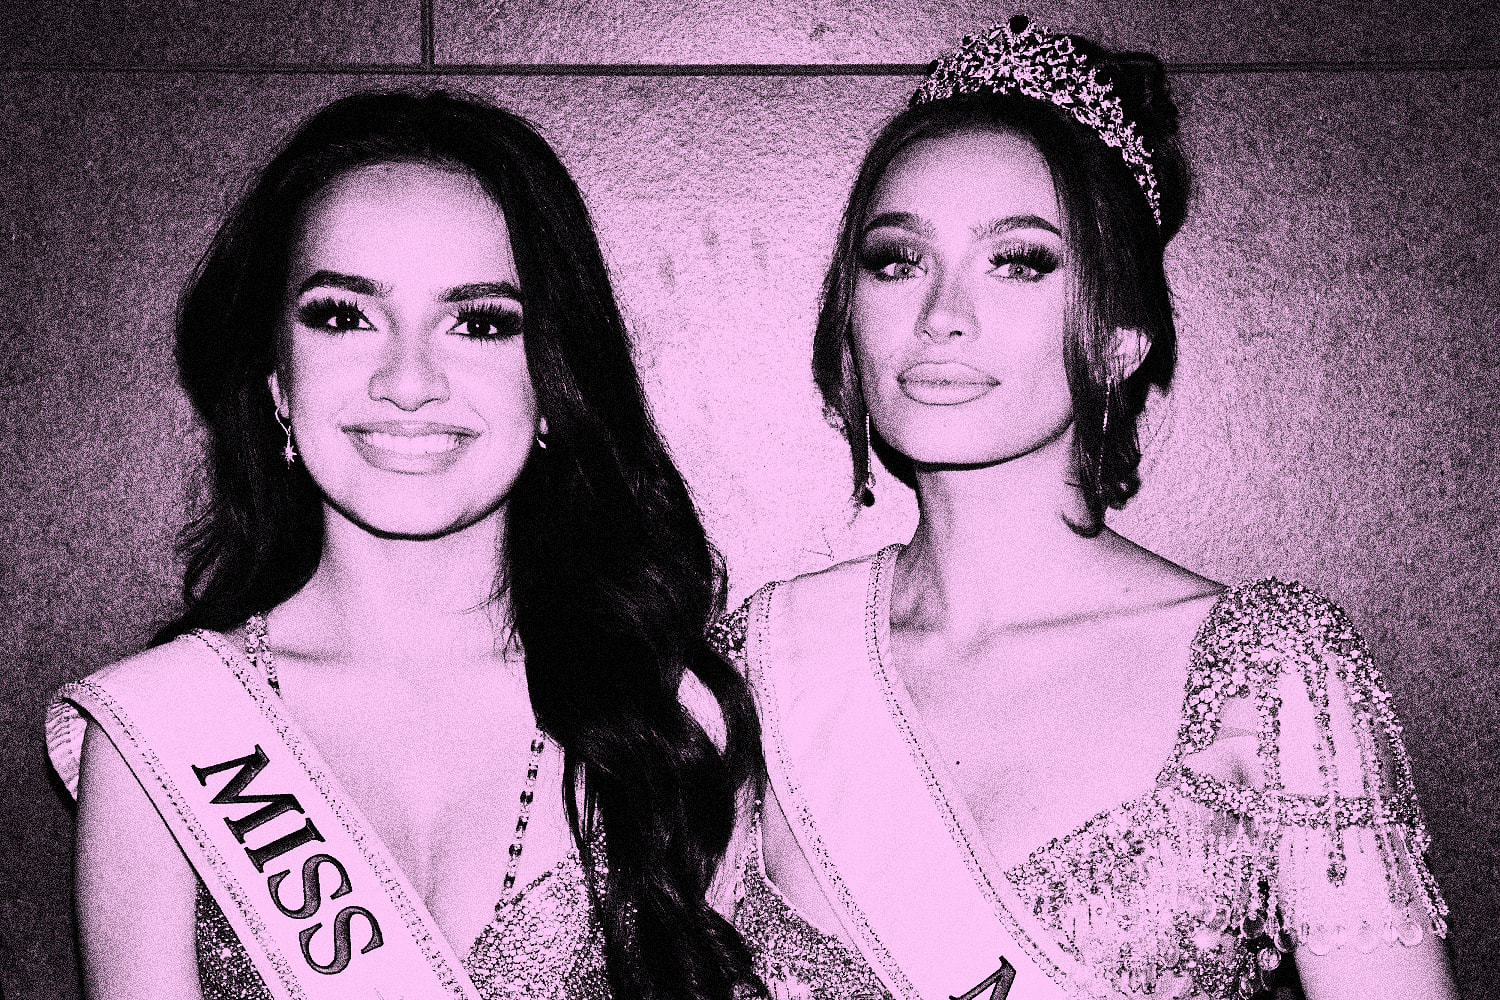 Miss USA resignation scandal pulls back curtain on pageant industry struggles